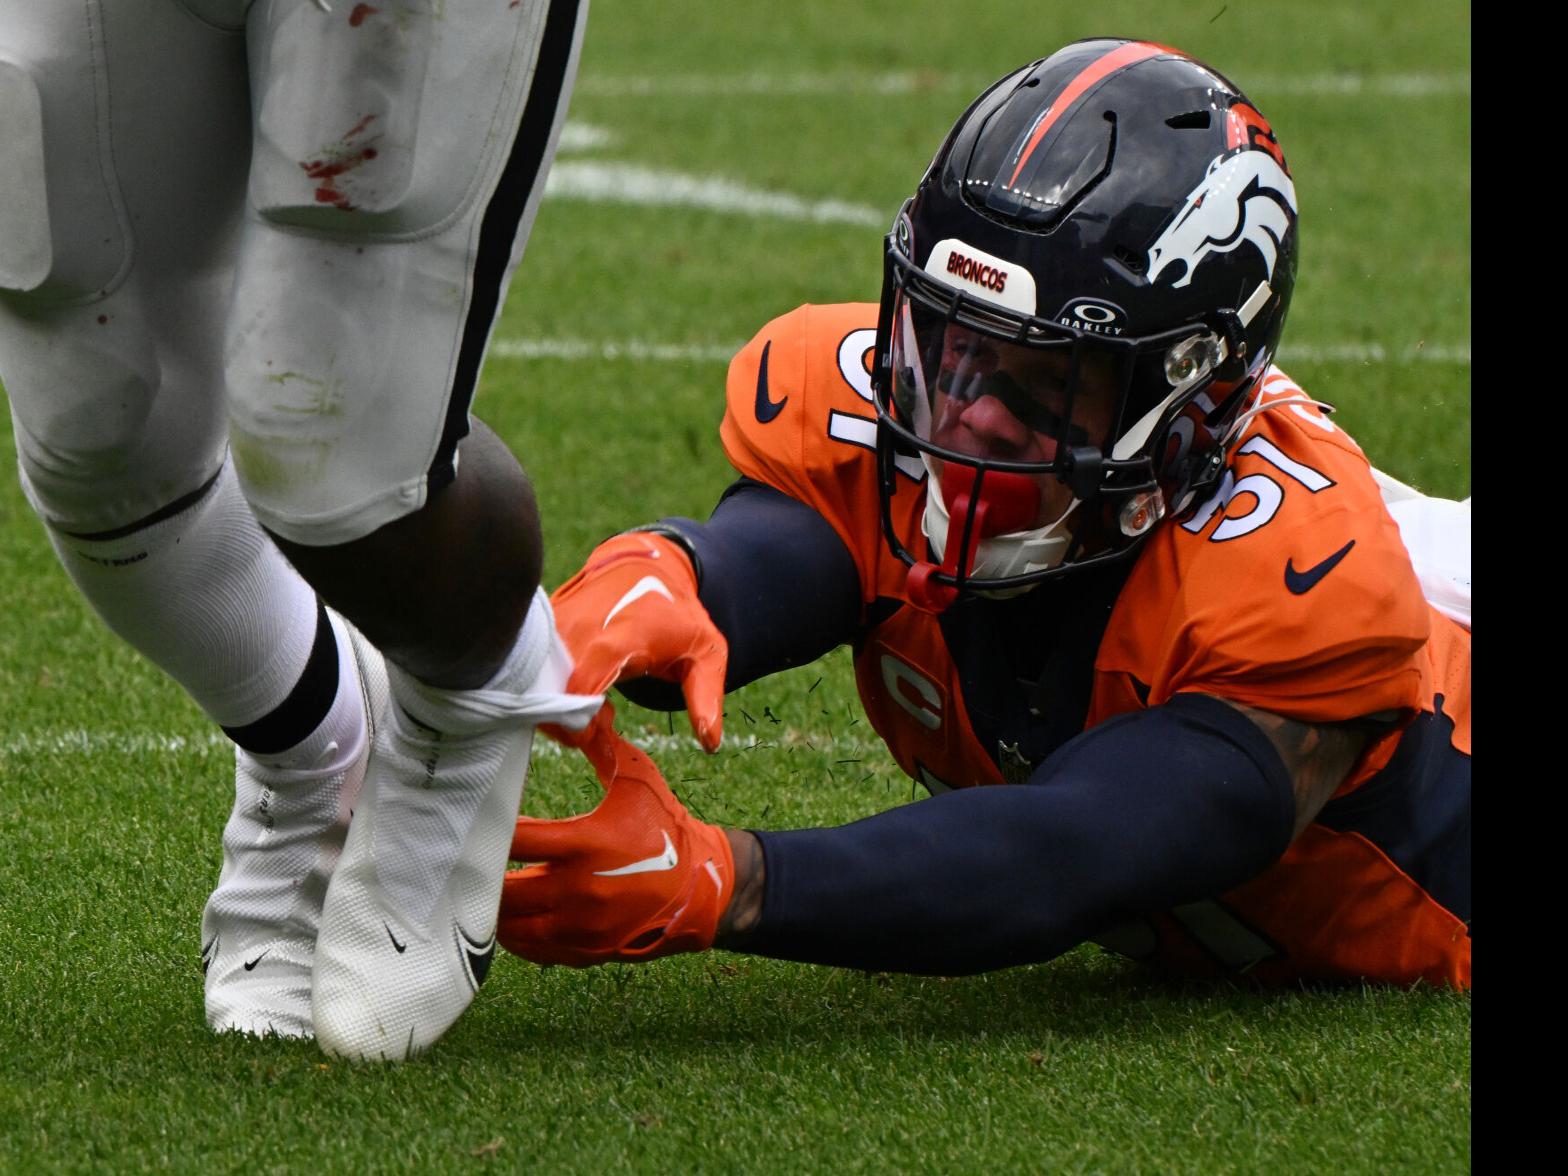 Broncos S Justin Simmons out Sunday against Miami